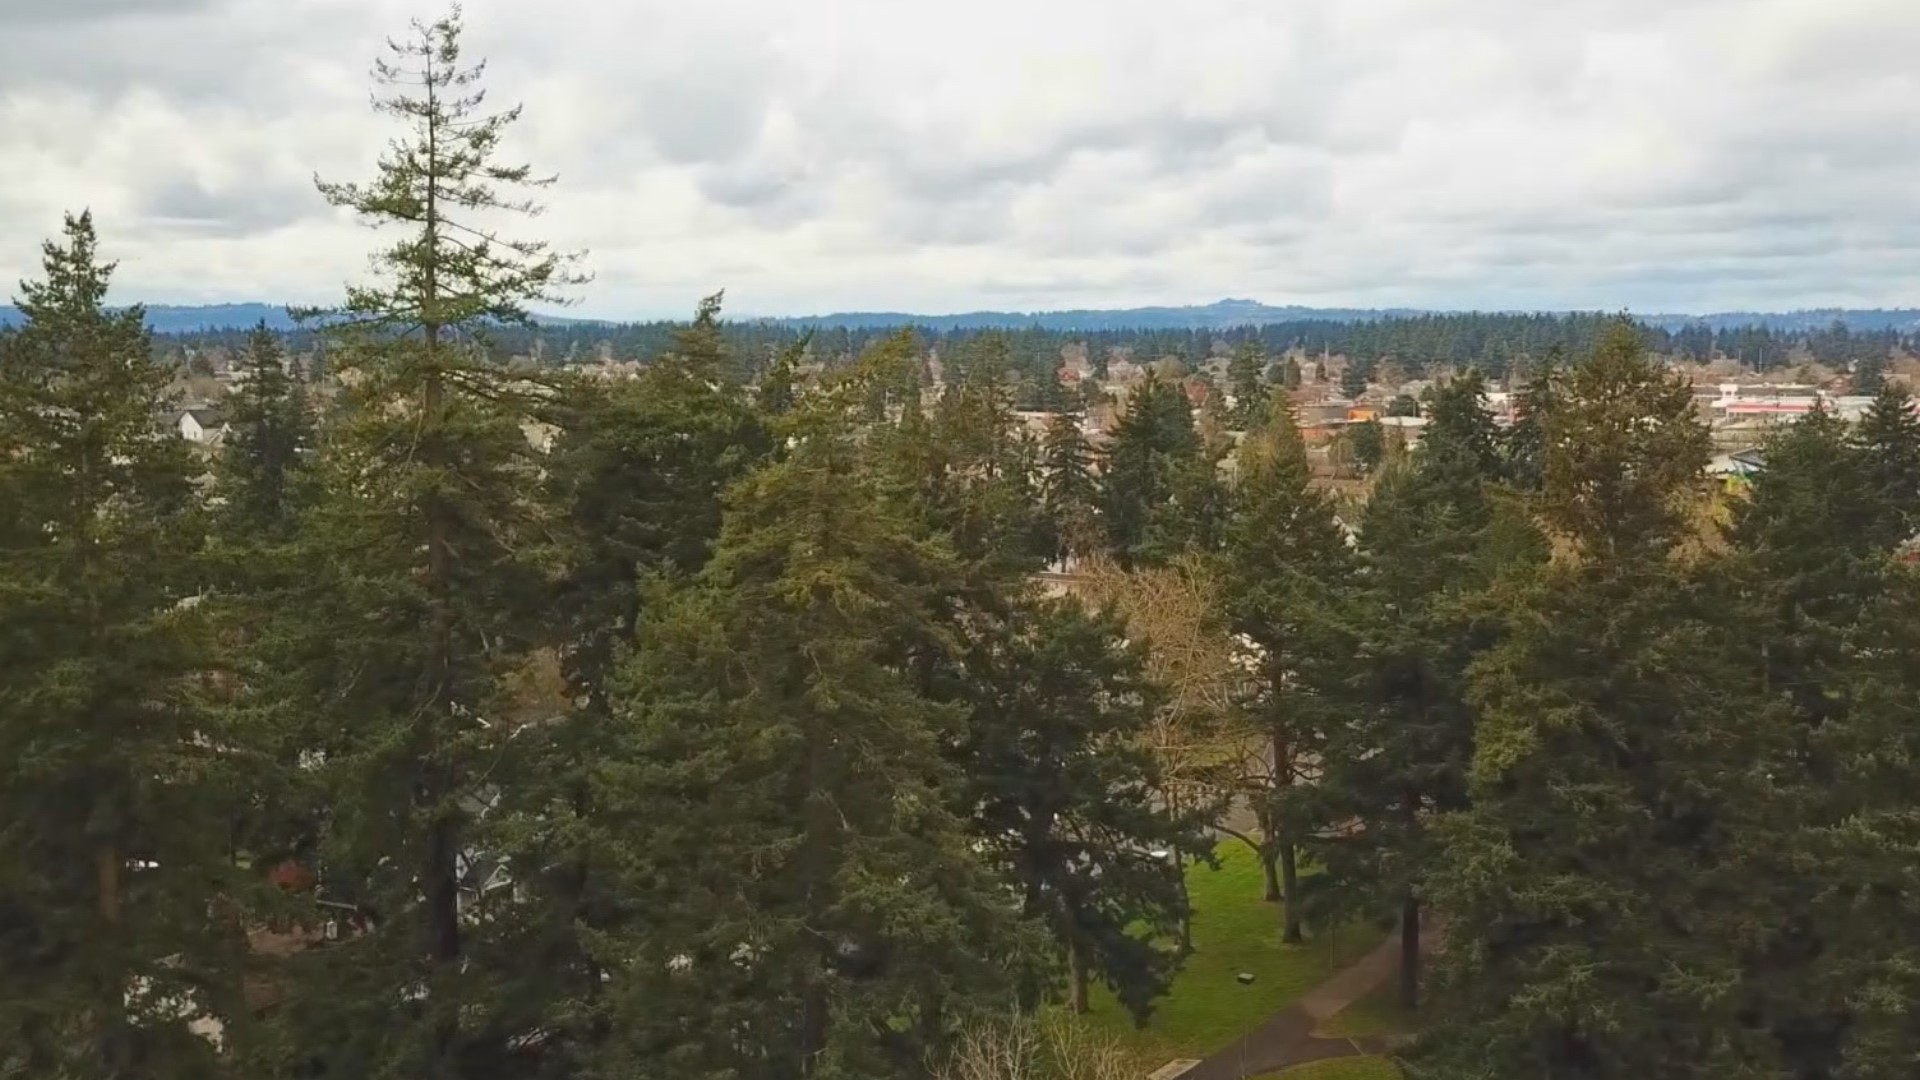 Cascadia Carbon is helping people cash in on trees in their yard while helping the environment. KGW's Chris McGinness explains.